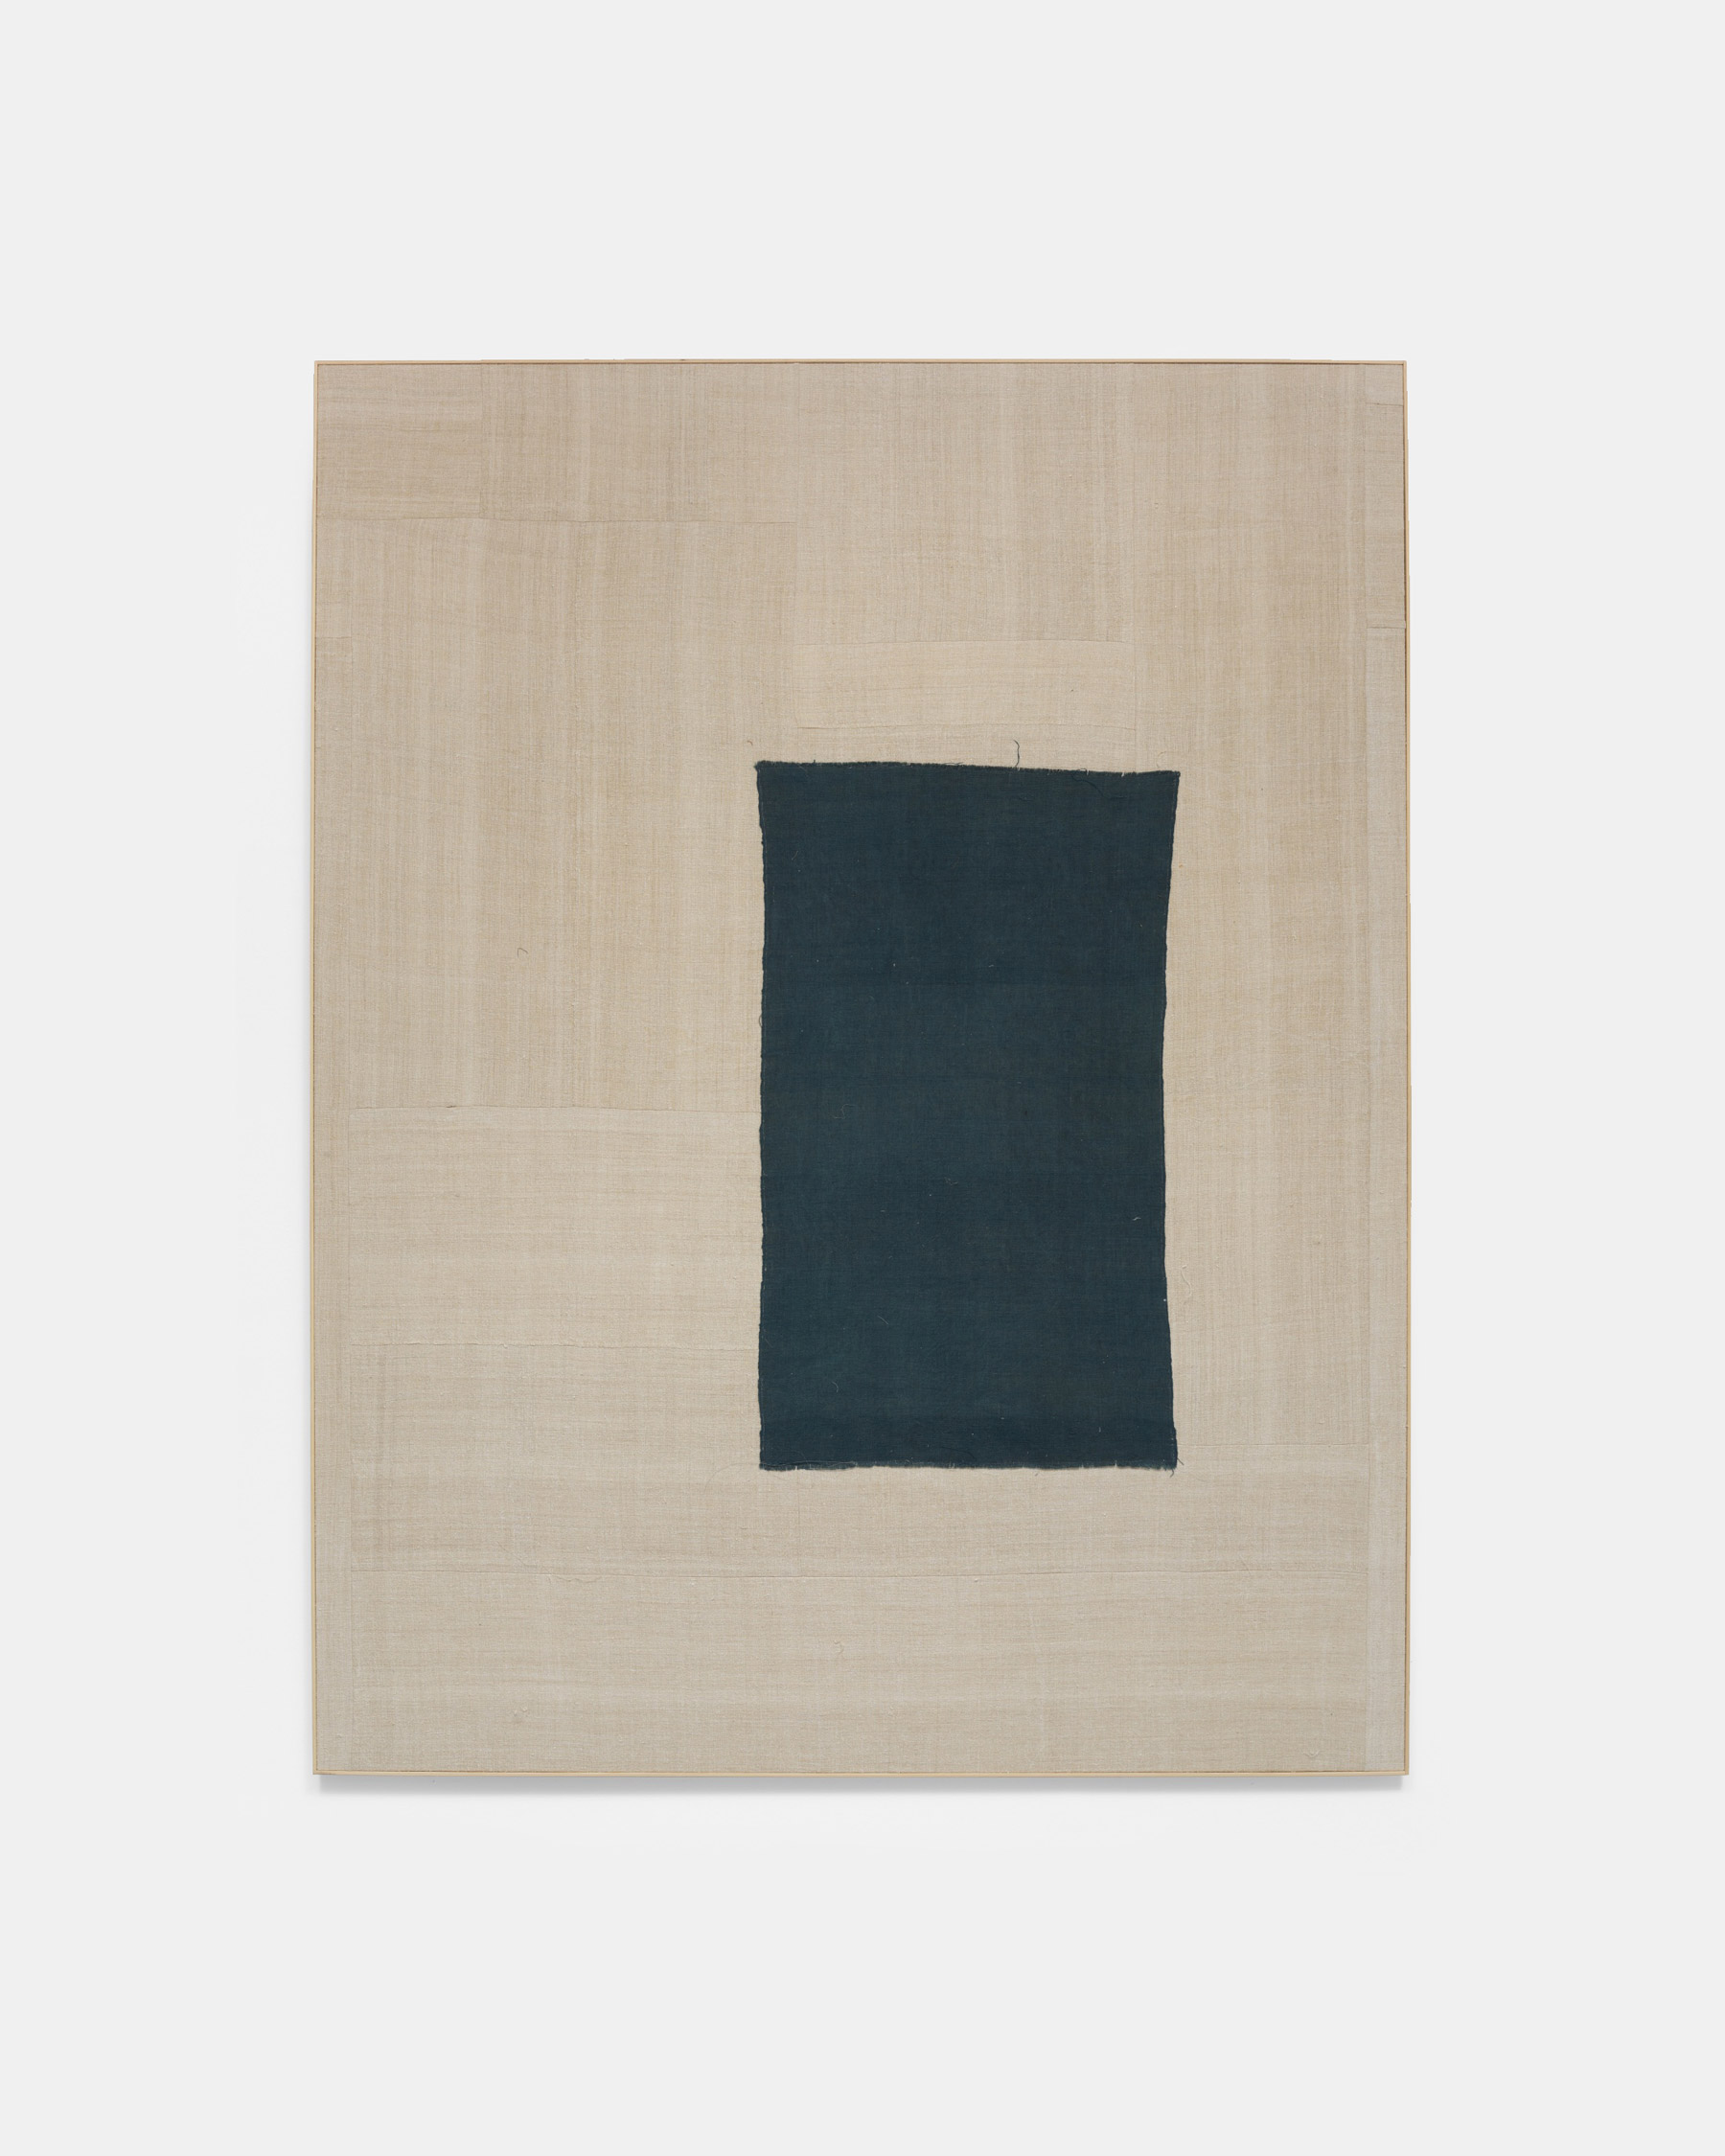 Lawrence Calver, Dusky, 2020, Dye and clay on stitched linen, ca. 323 x 251 cm © The Artist, Image Courtesy Simchowitz Gallery